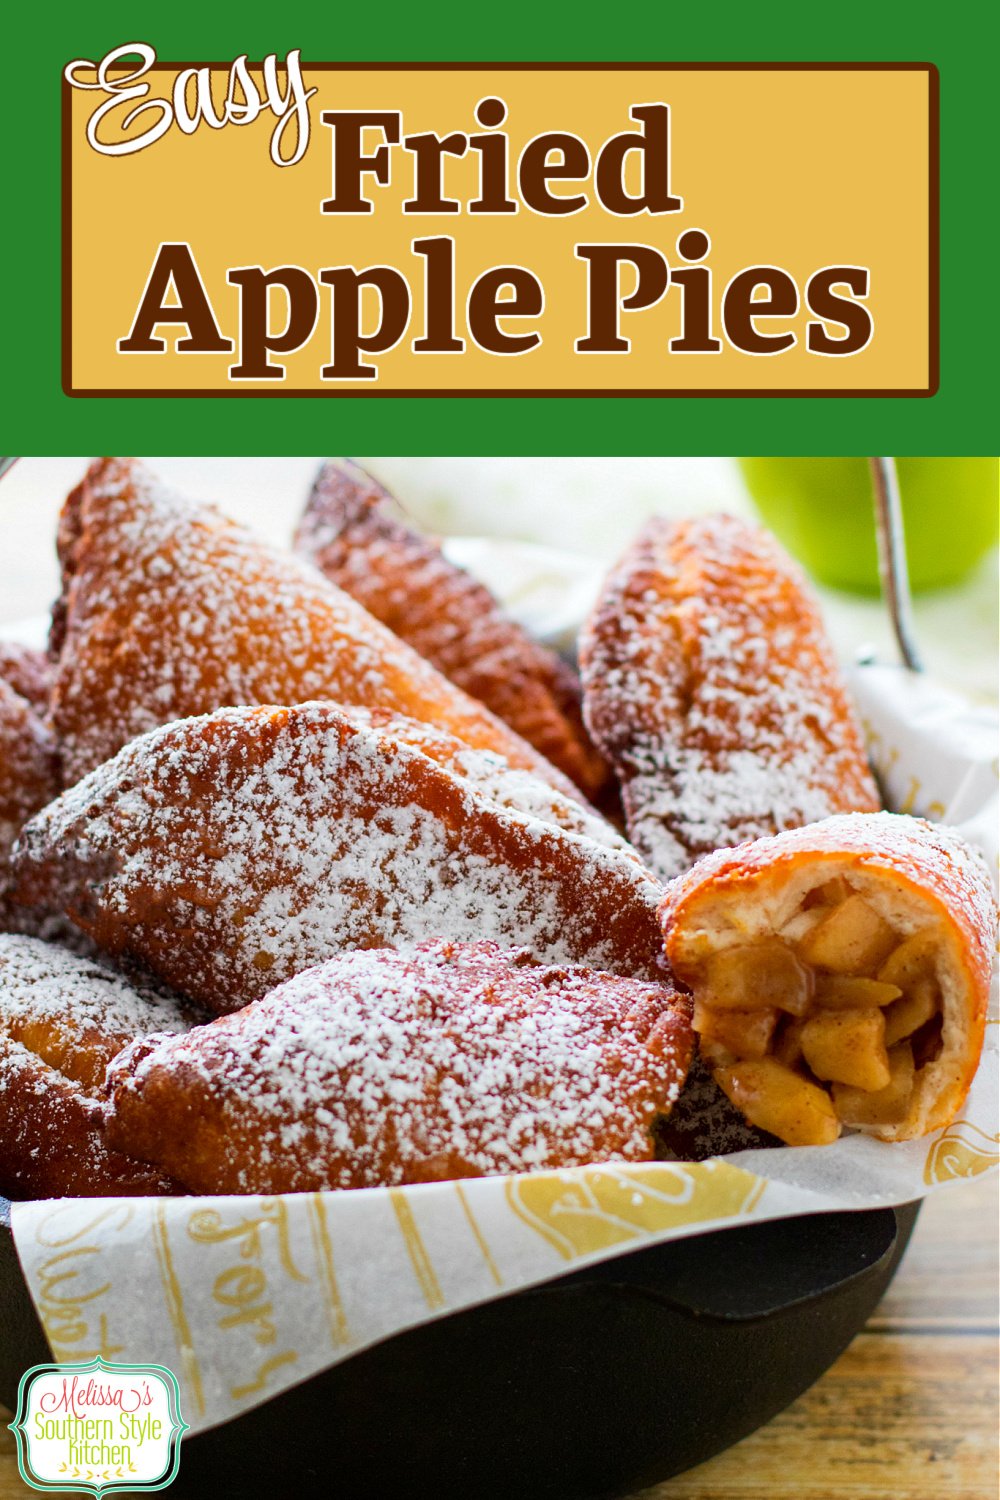 Enjoy these Easy Fried Apple Pies with a dusting of powdered sugar for breakfast, brunch or dessert #friedapplepies #applepie #friedpies #apples #appledesserts #breakfast #brunch #southernfood #southernrecipes #desserts #dessertfoodrecipes via @melissasssk